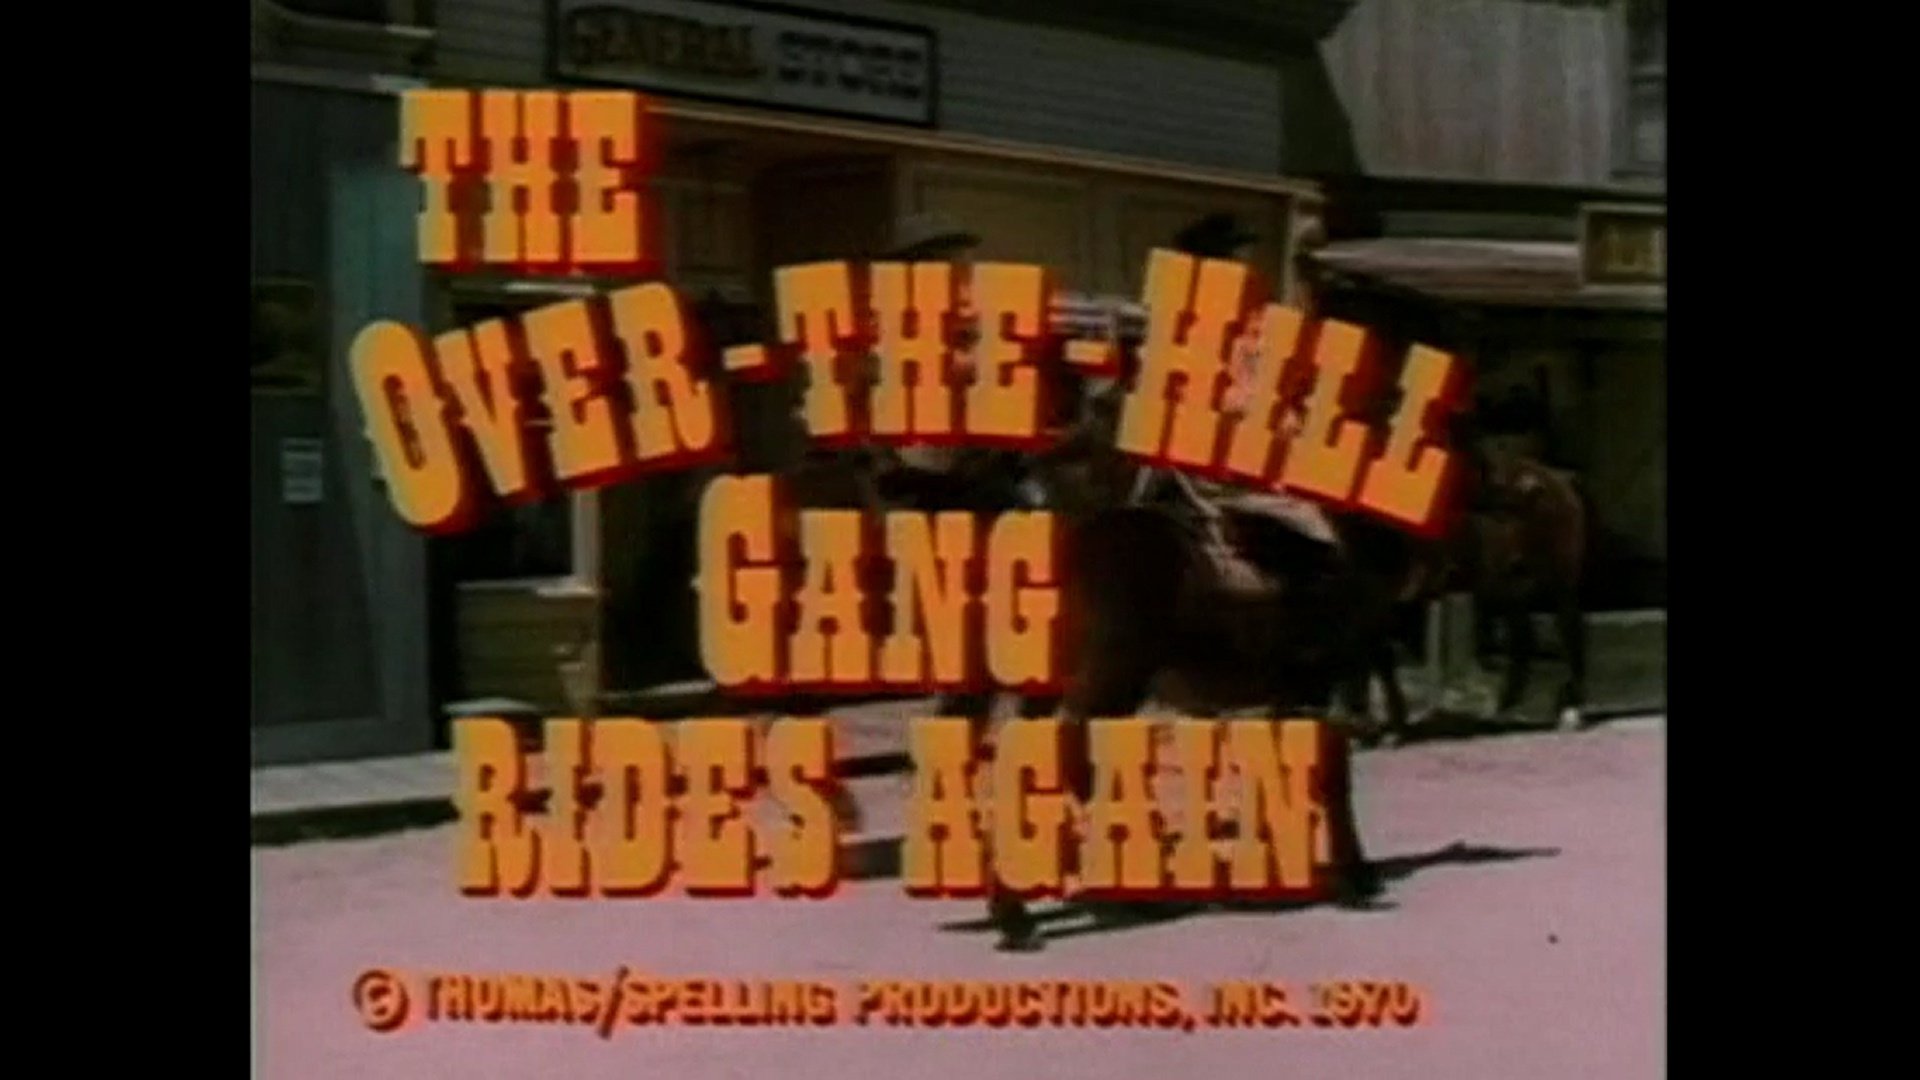 The Over-the-Hill Gang Rides Again